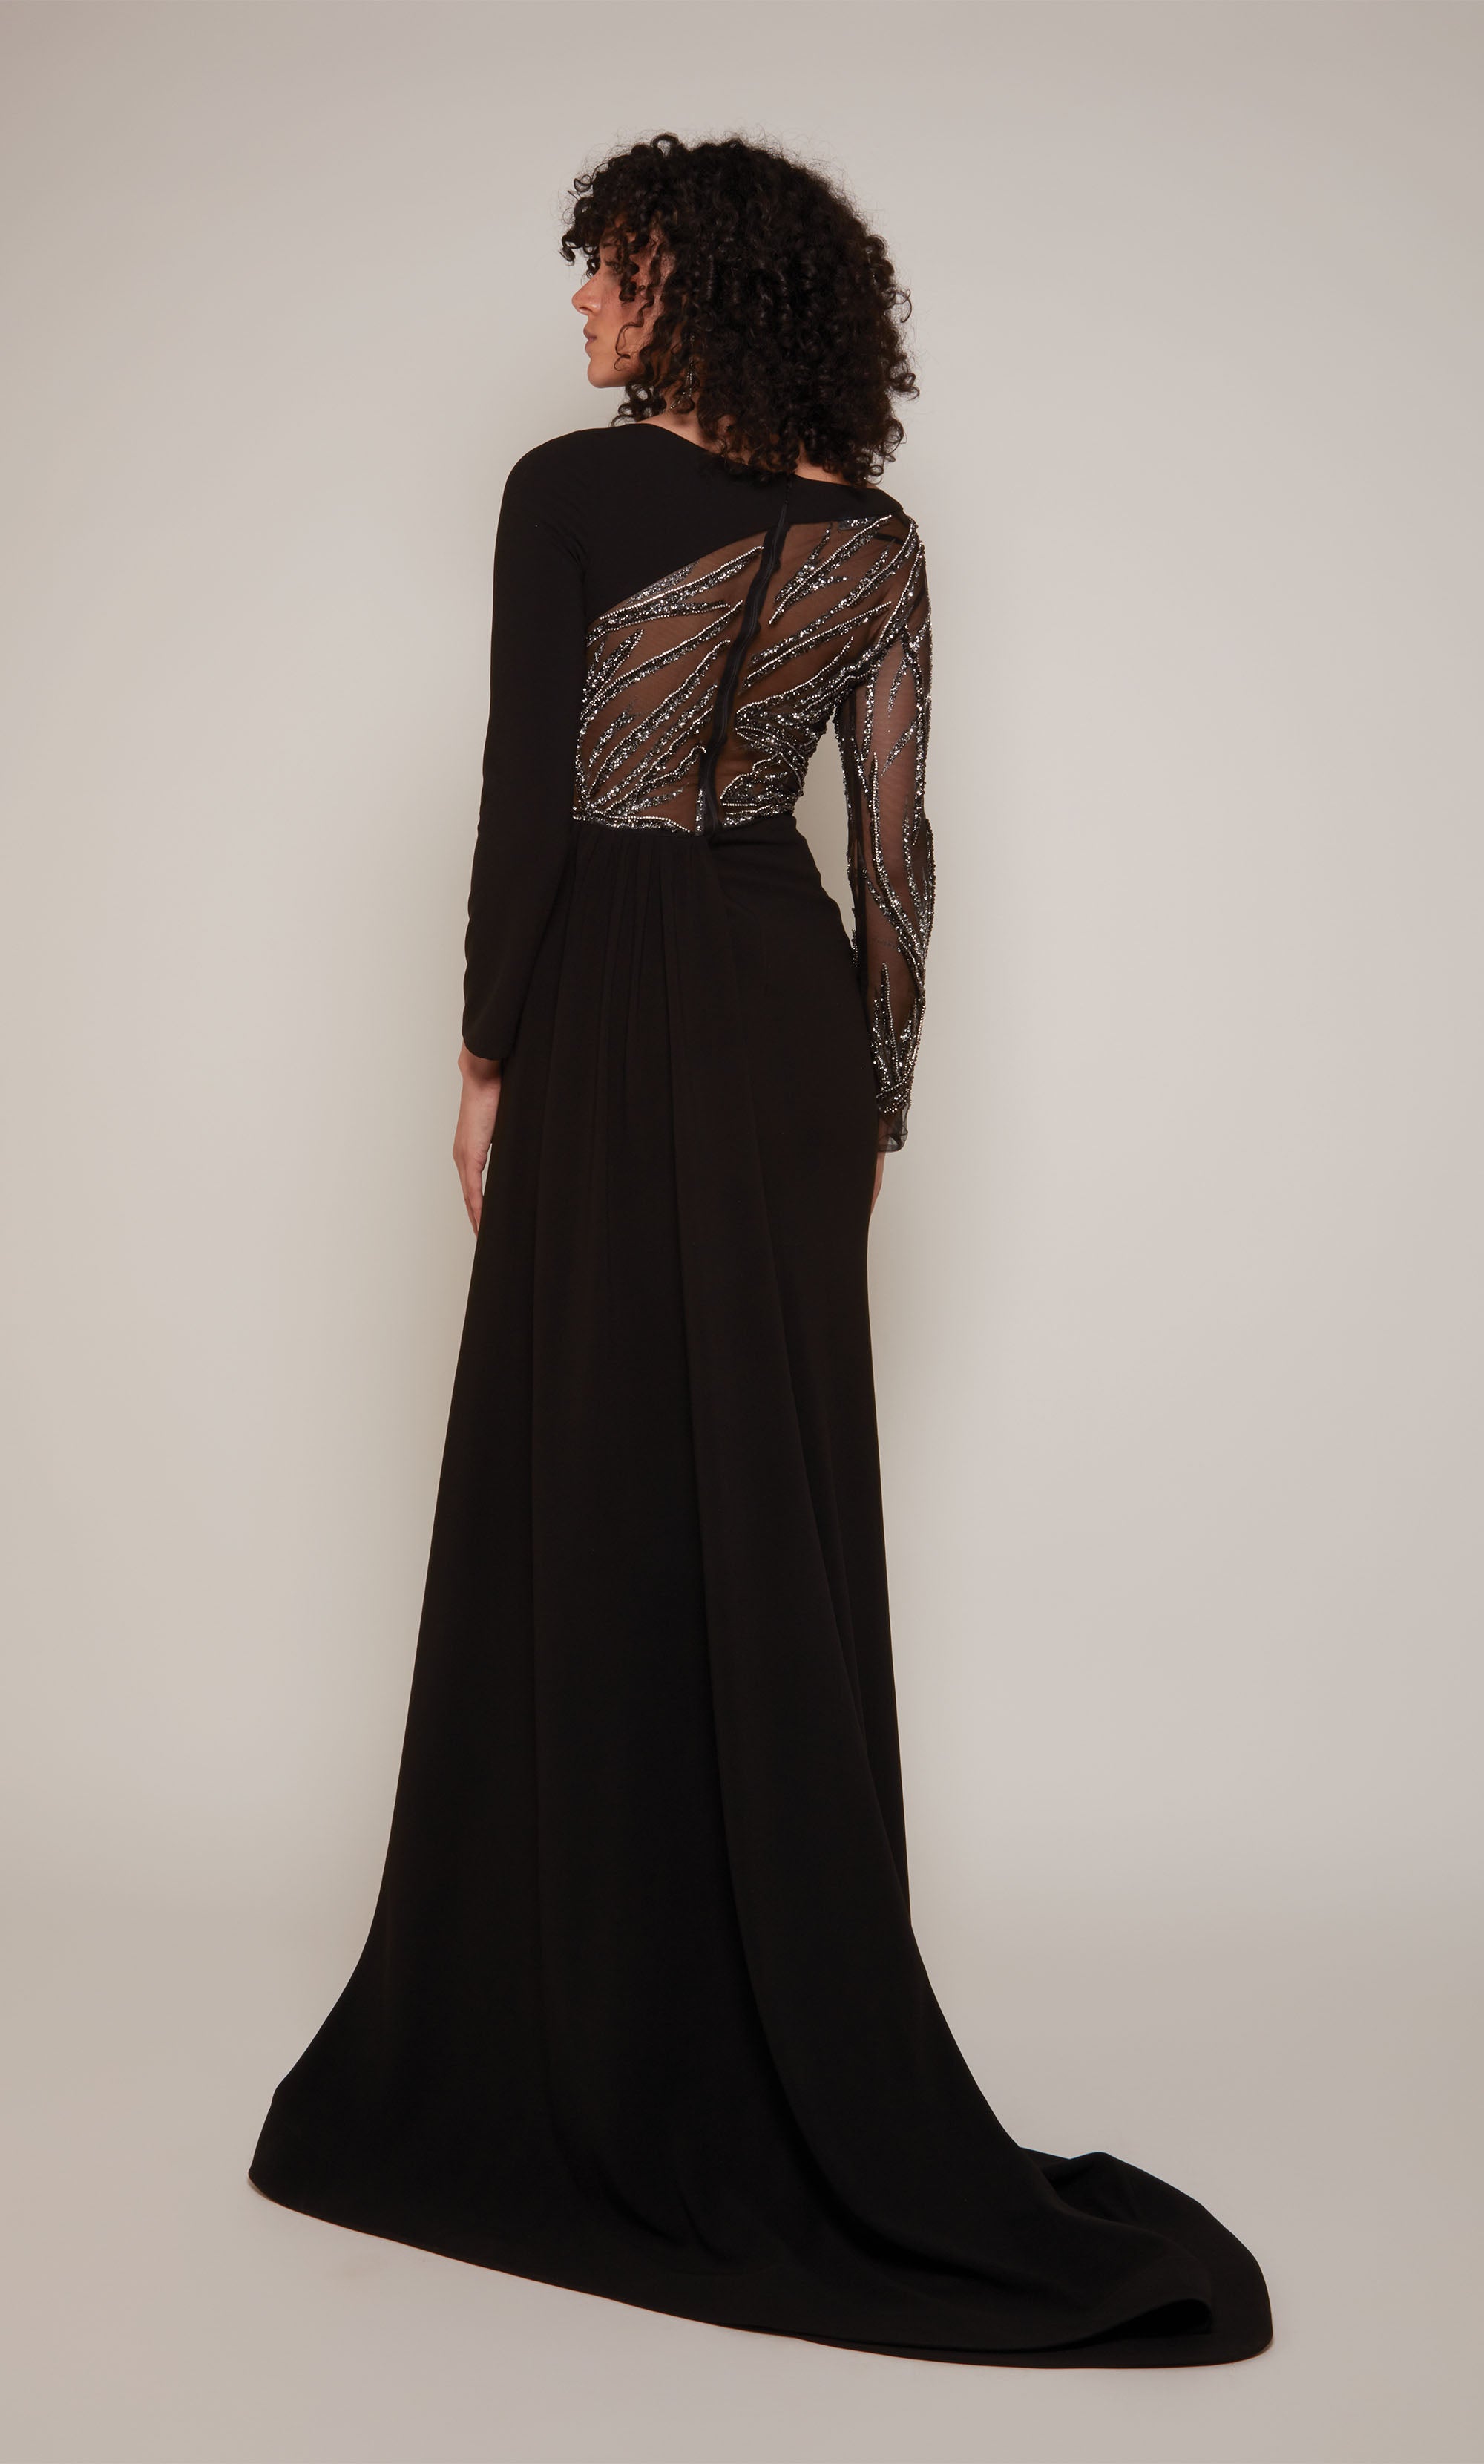 Sheer Illusion Embellished Gown